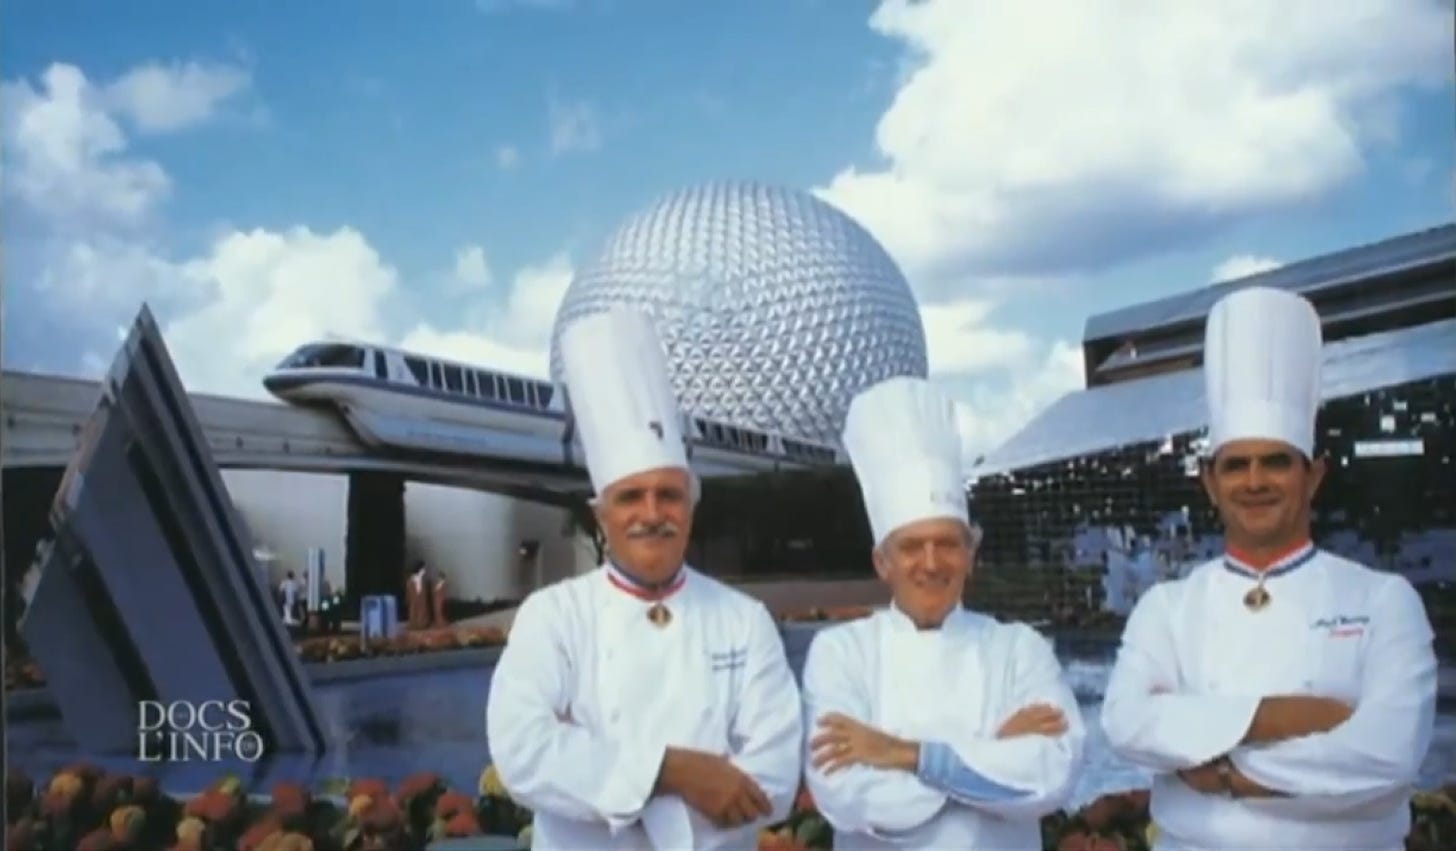 Disney and more: Paul Bocuse, The Legendary French Chef Dies at 91